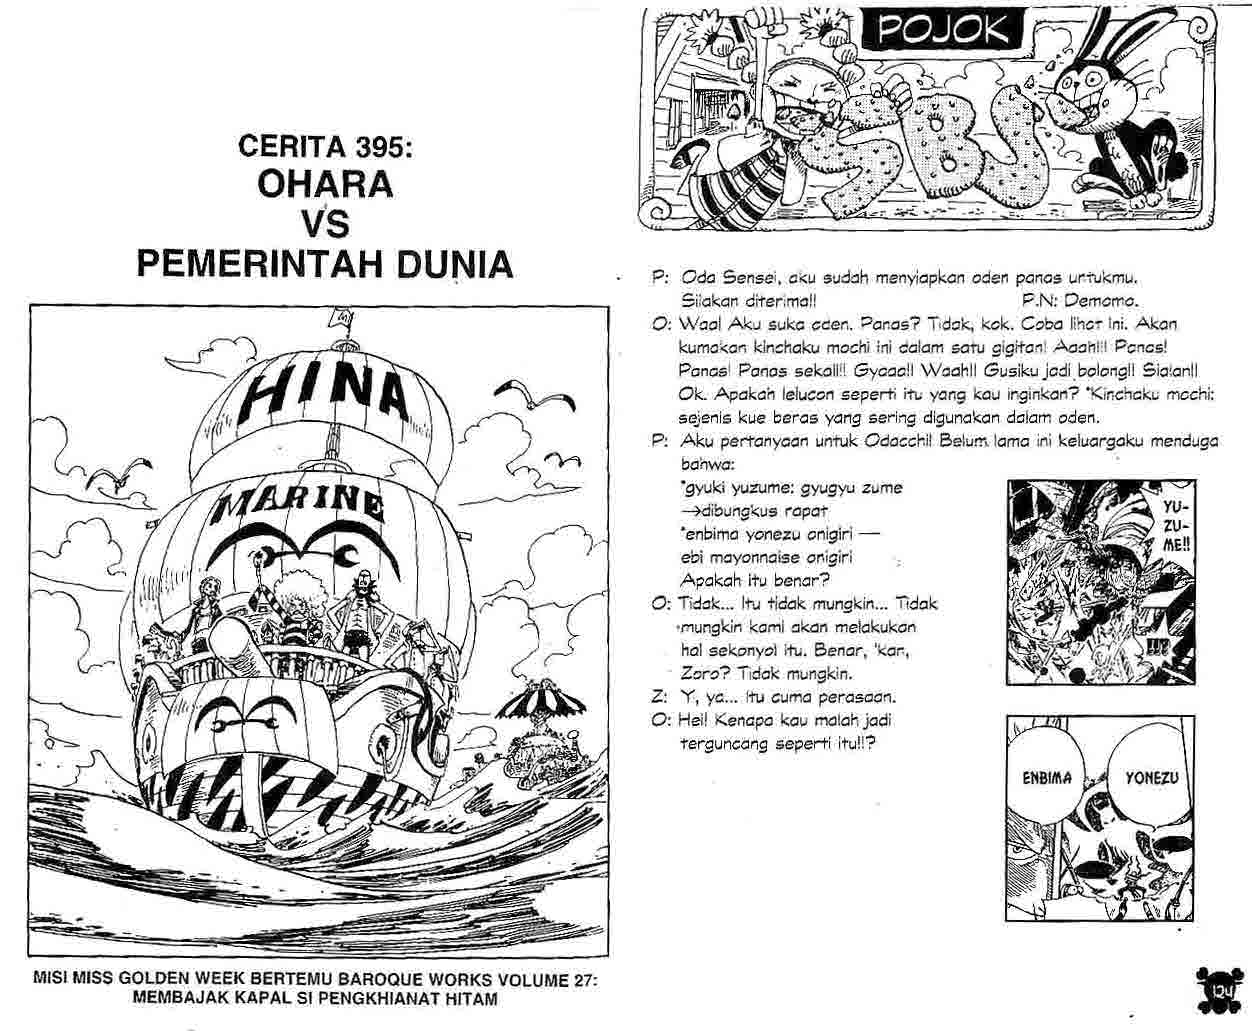 One Piece: Chapter 395 - Page 1